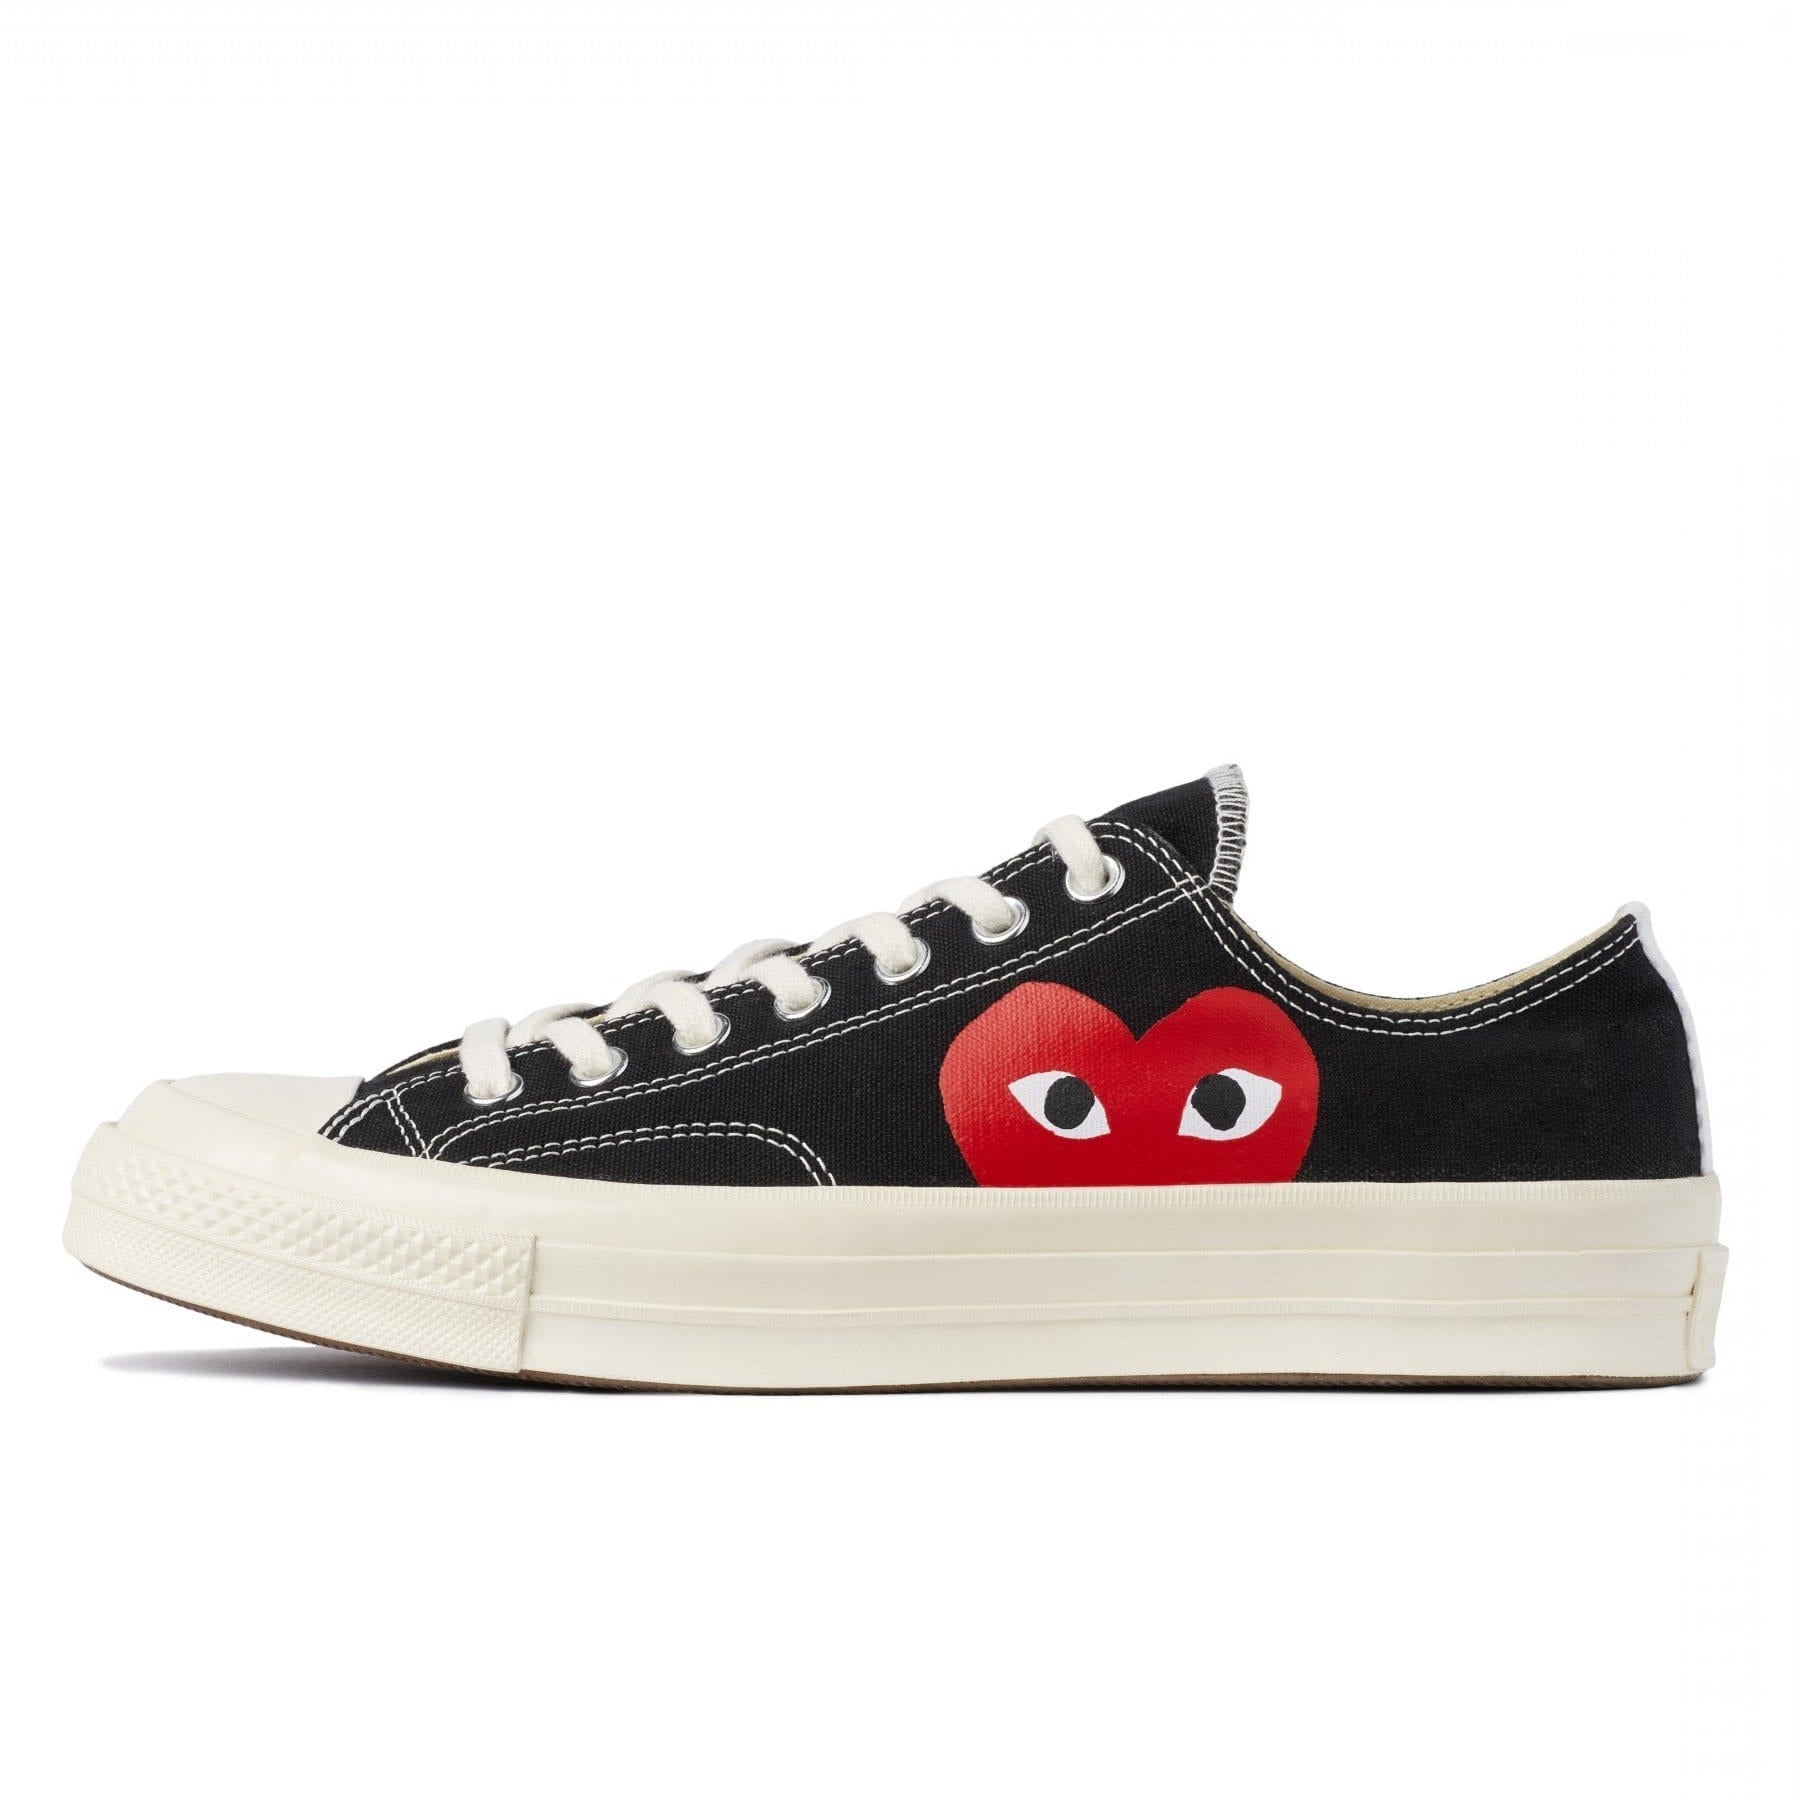 comme des garcons converse 70s x play cdg trainers